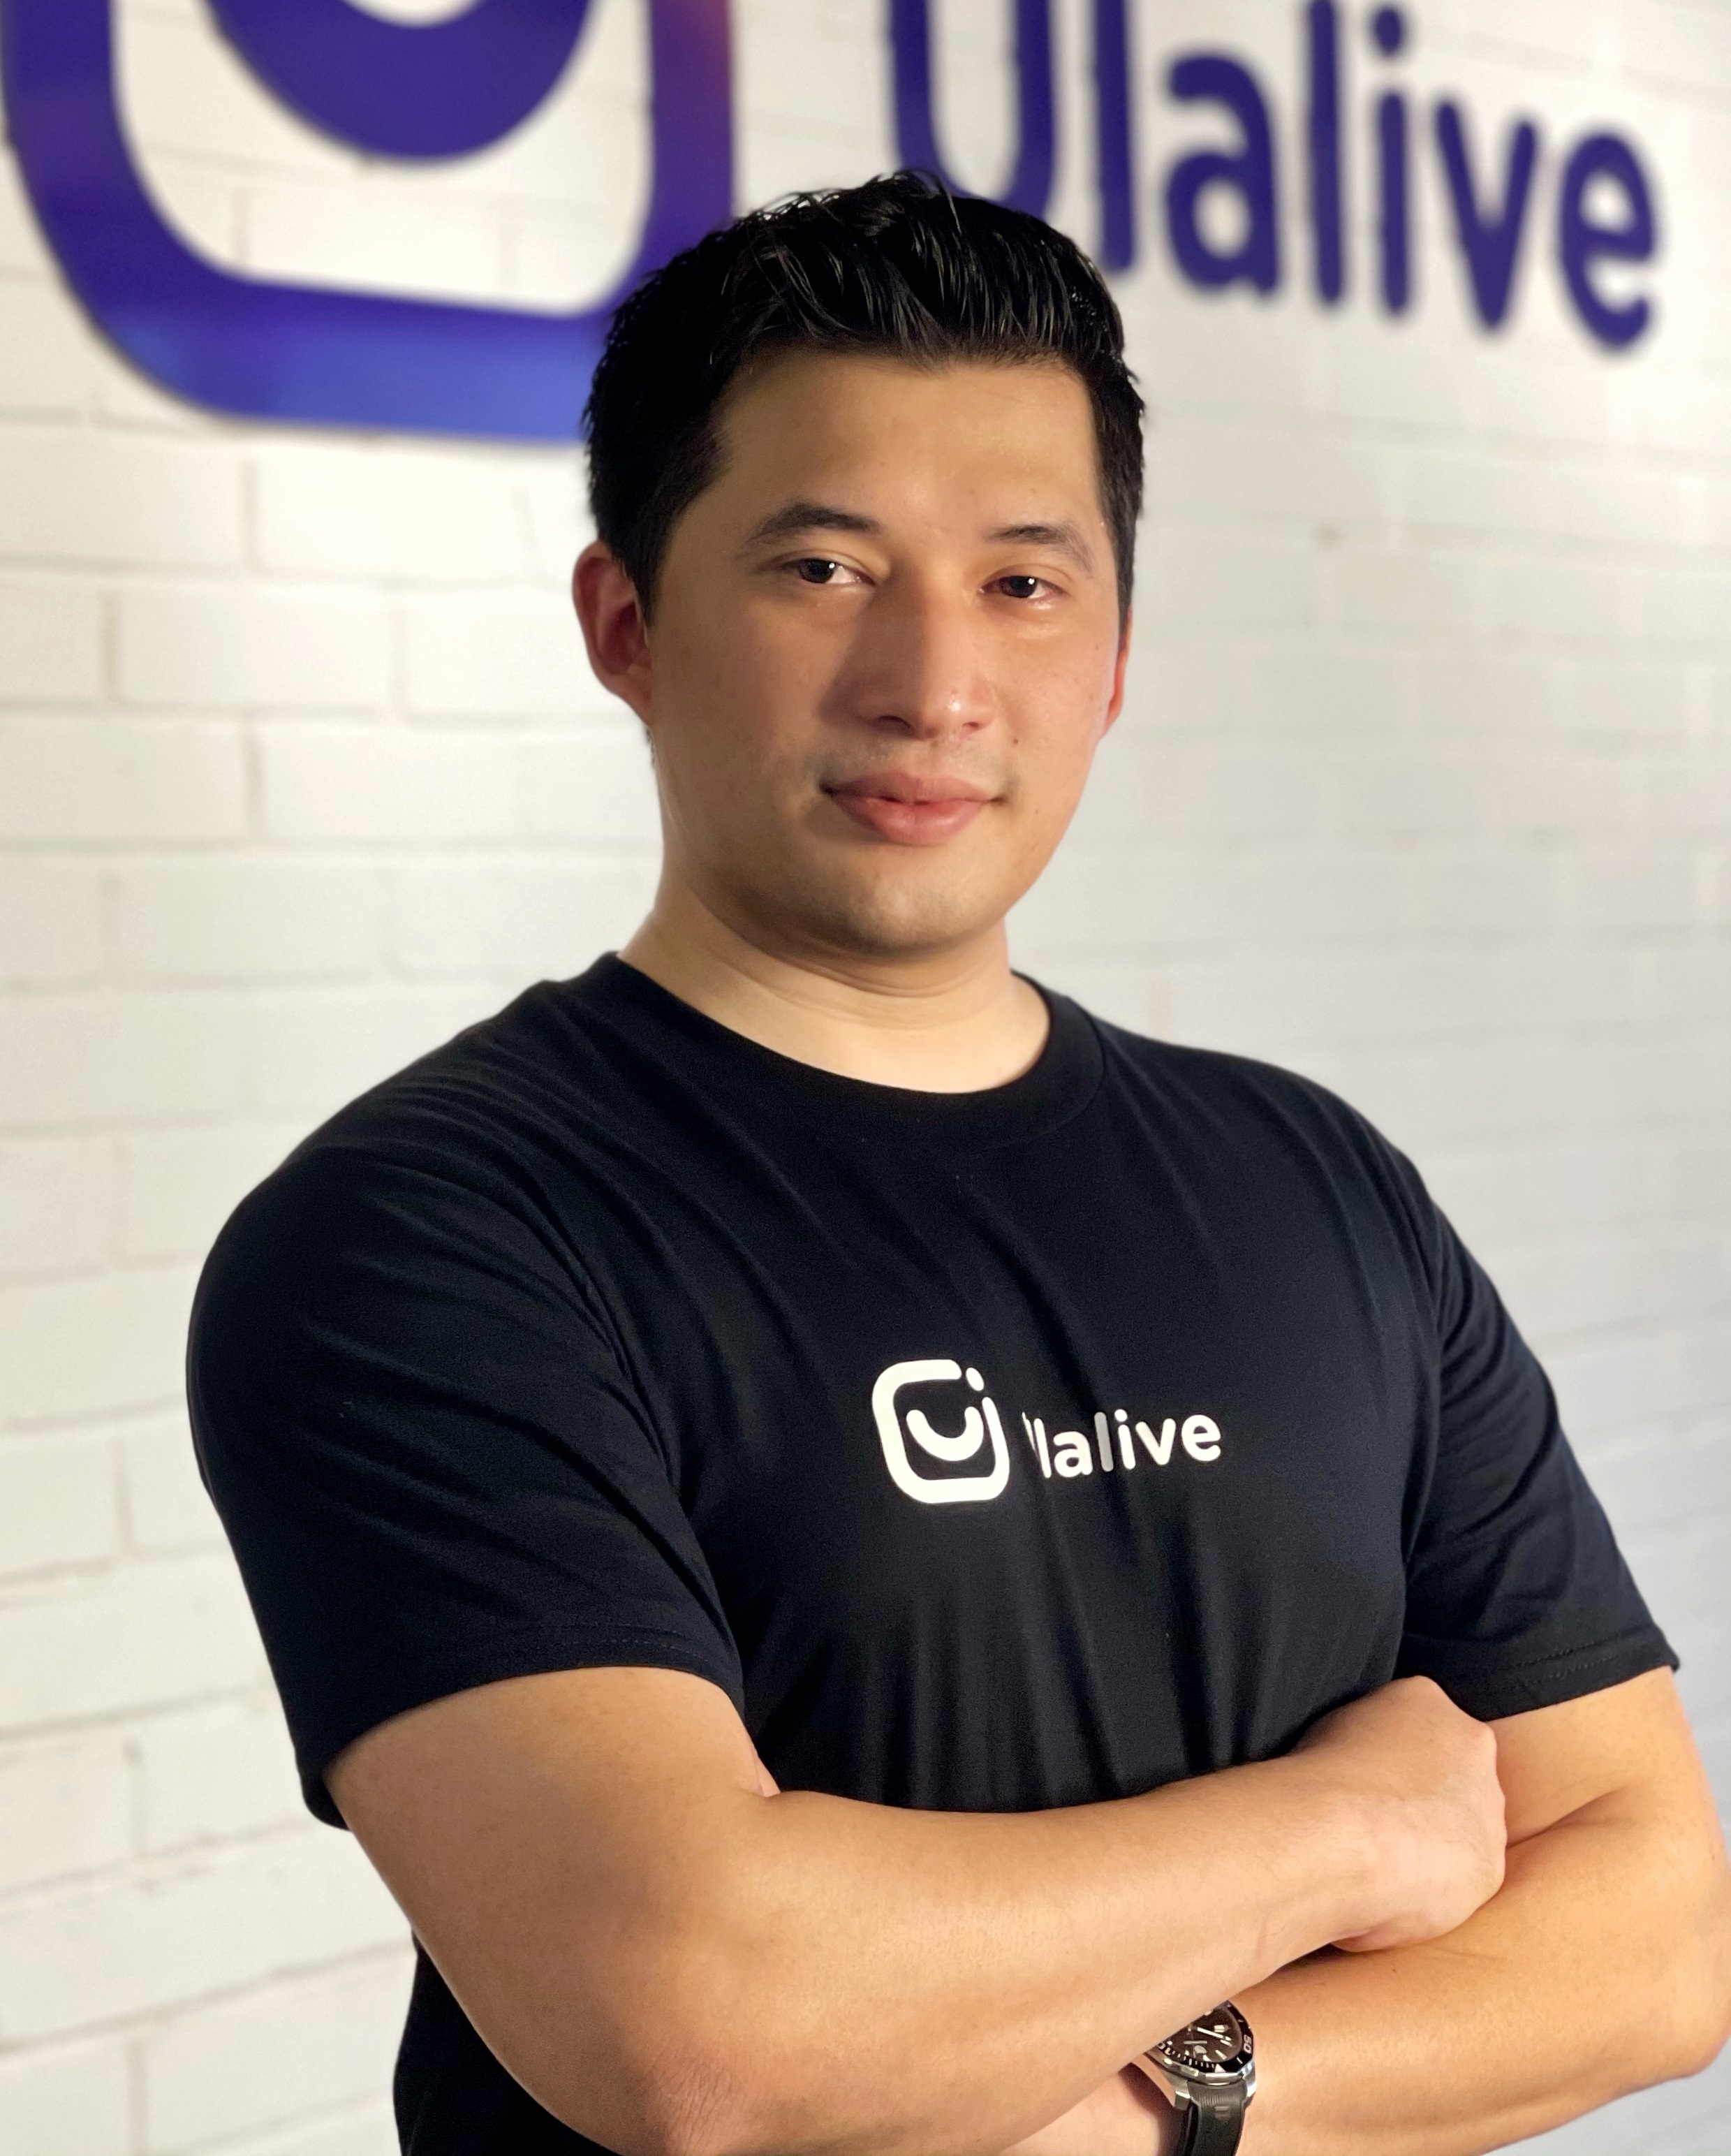 Malaysian social media platform Ulalive bags US$300k pre-seed funding - before launch